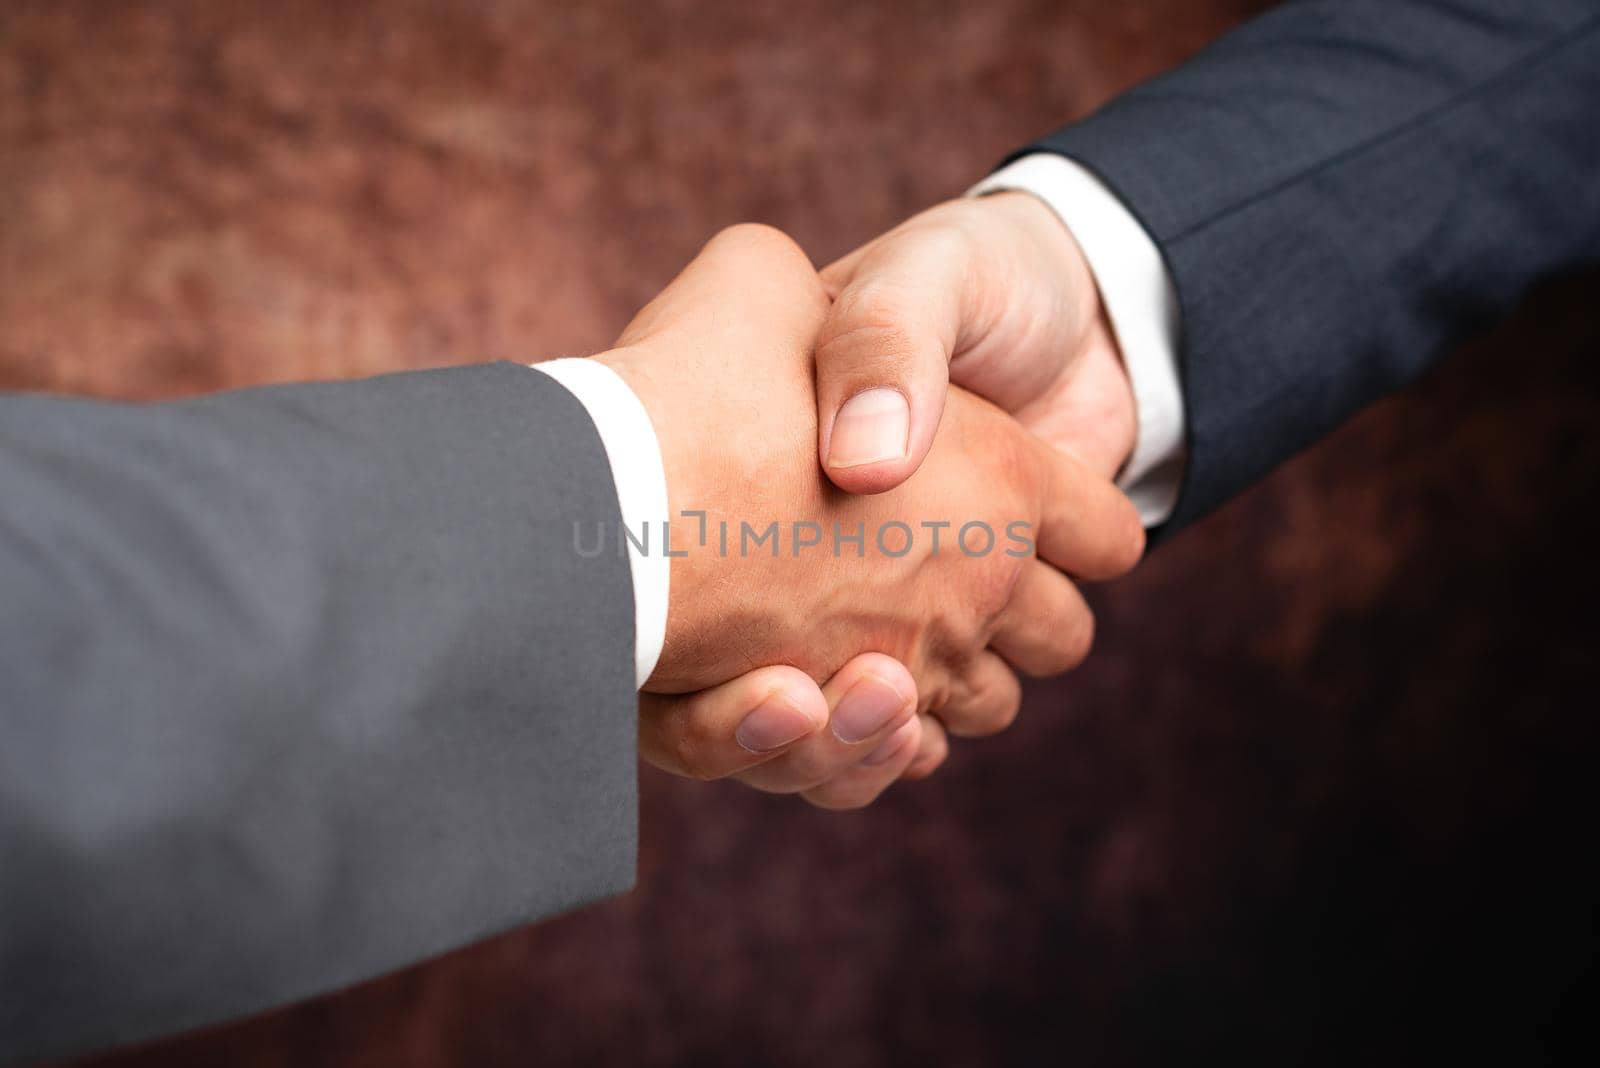 Corporate Businessmen Handshake Indoors.Two People Professionally Well Dressed Gesturing Togetherness.Working Colleague Partners Sign Deal In Agreement To Contract by nialowwa